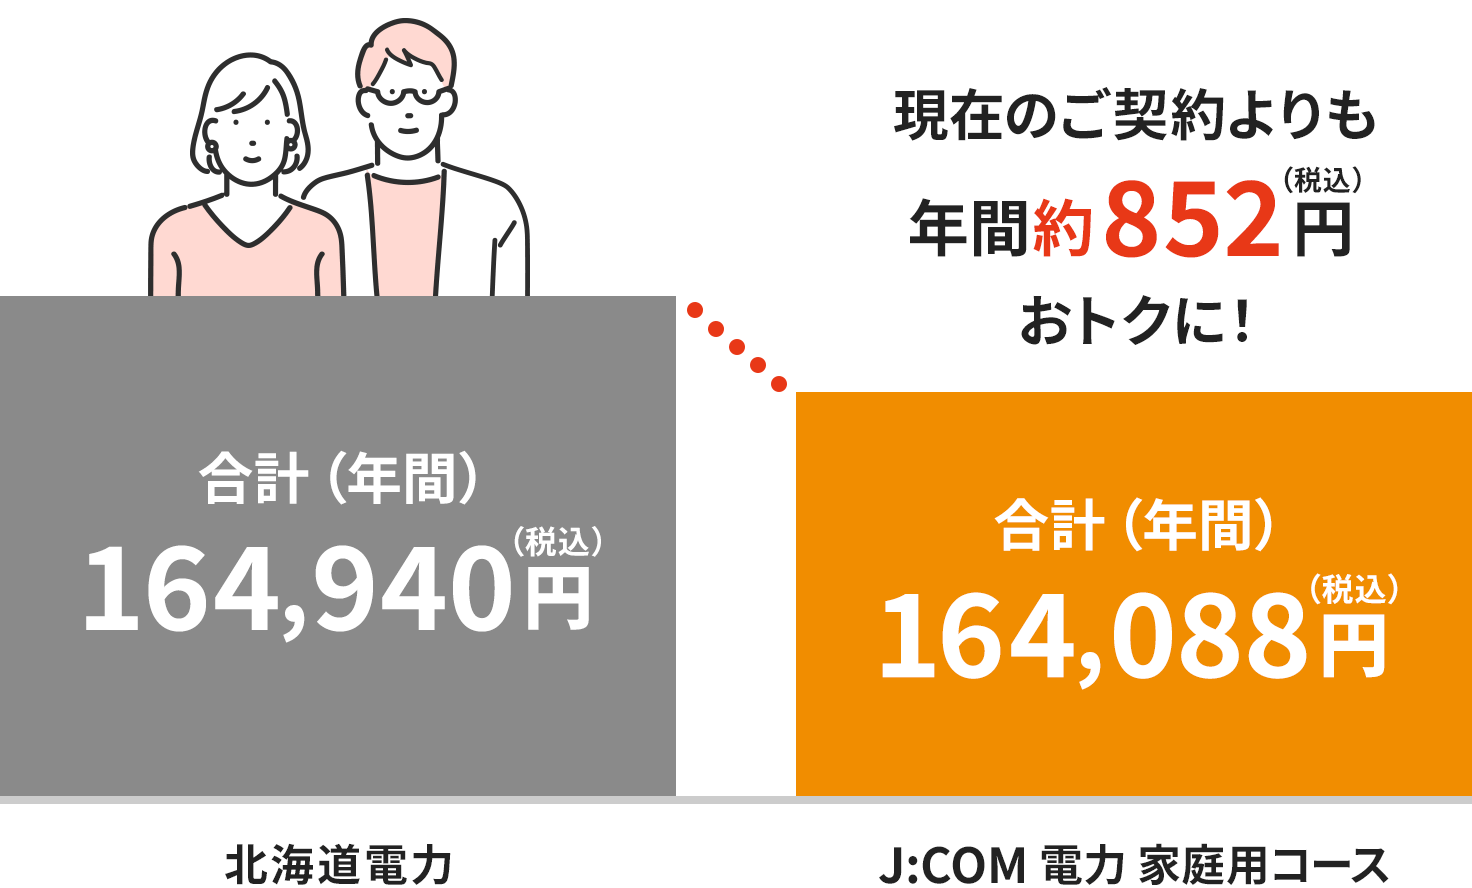 Image of charges in the Hokkaido Electric Power area (for a two-person household)